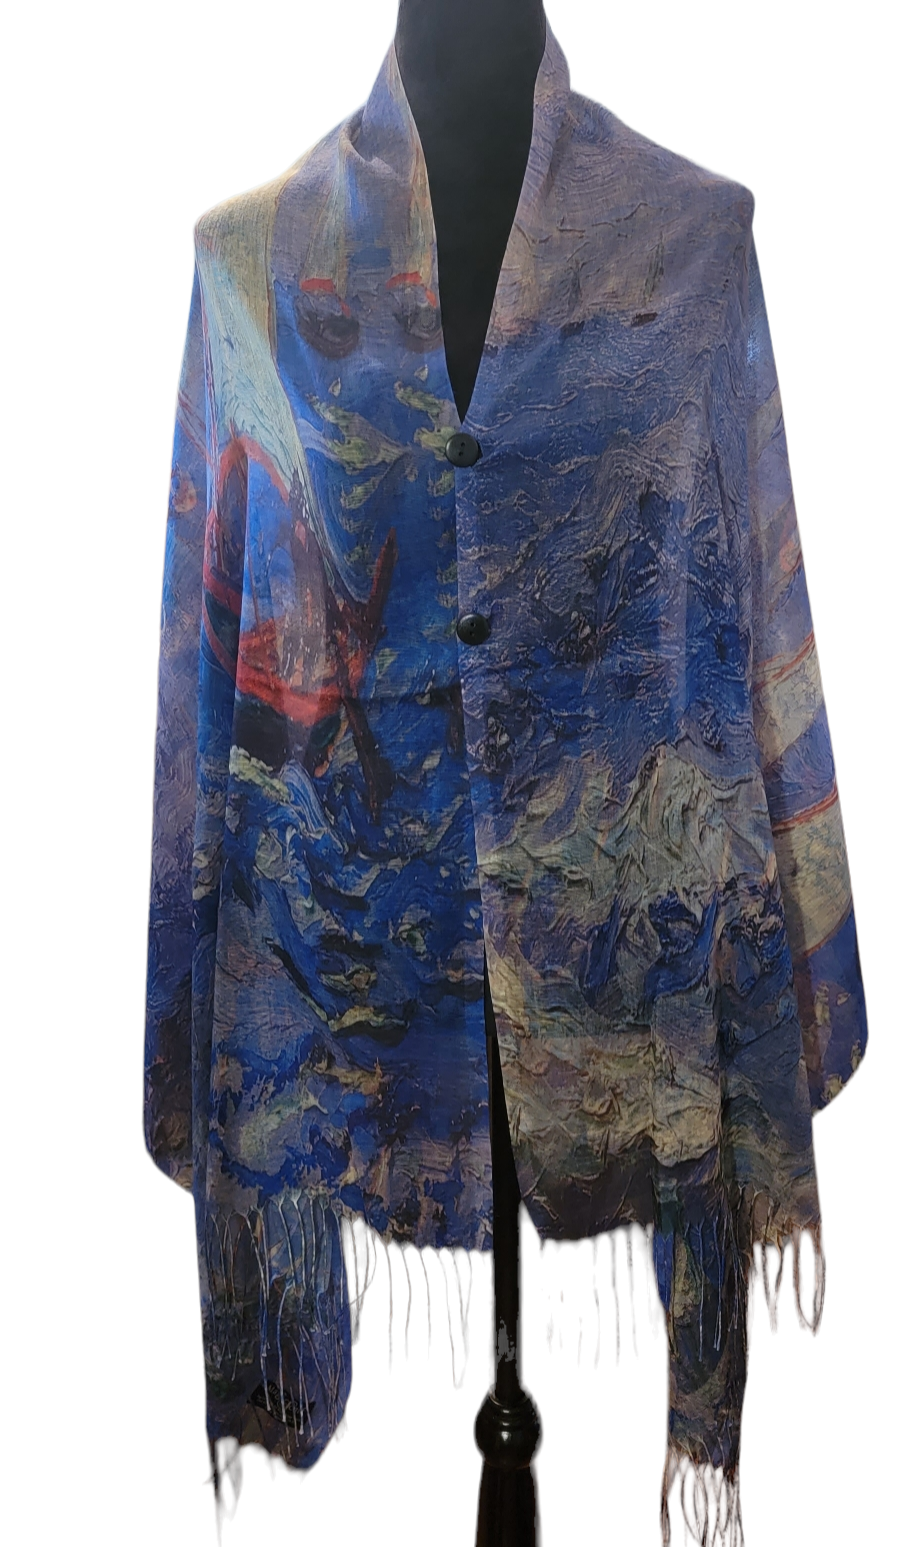 Wrap Yourself in Art: Vibrant Print Shawls Inspired by Fine Art - 03